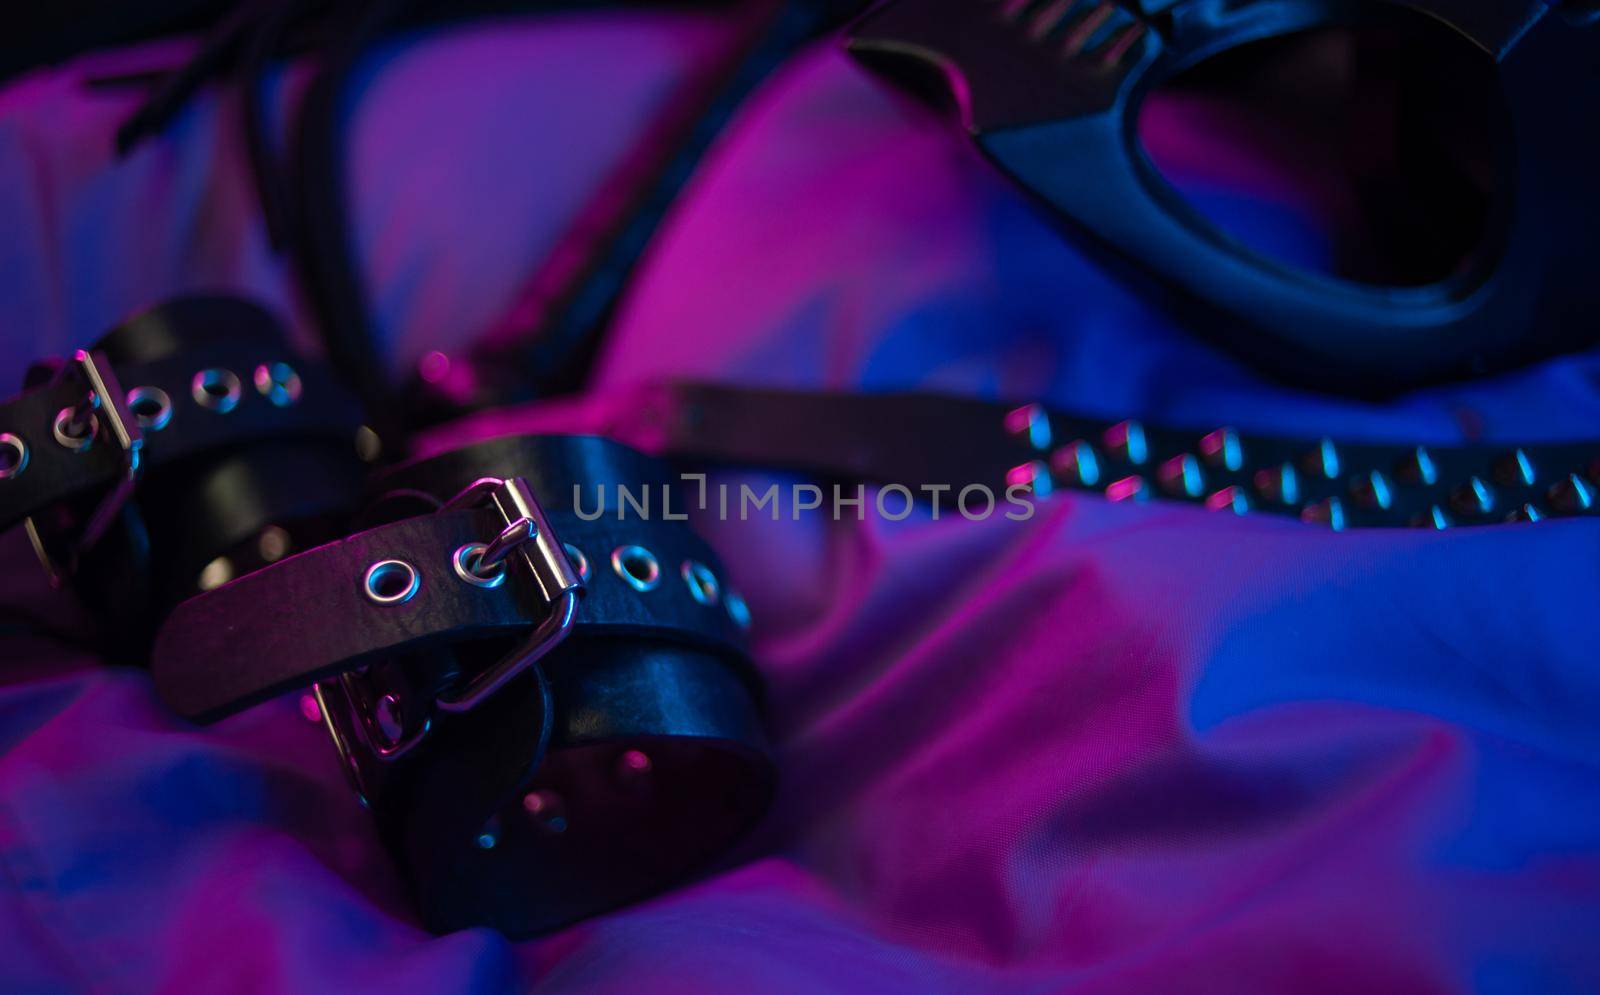 the leather bdsm handcuffs and accessories for bdsm games in neon light